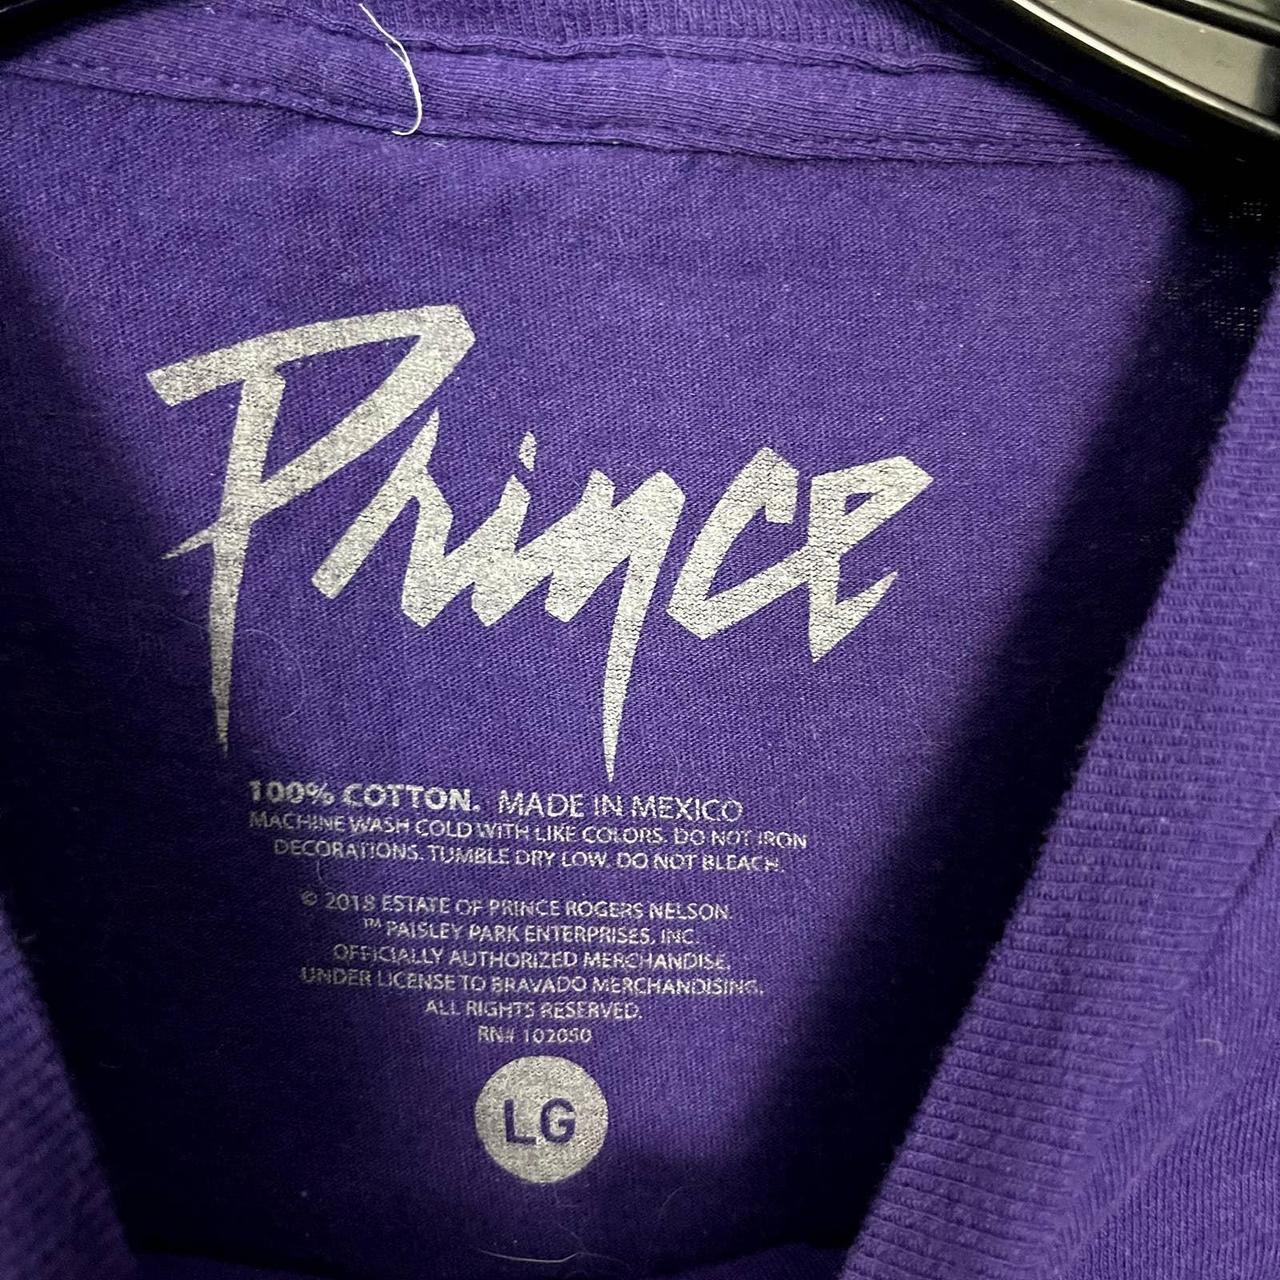 Product Image 3 - Prince Band Shirt

Good condition
Front spell